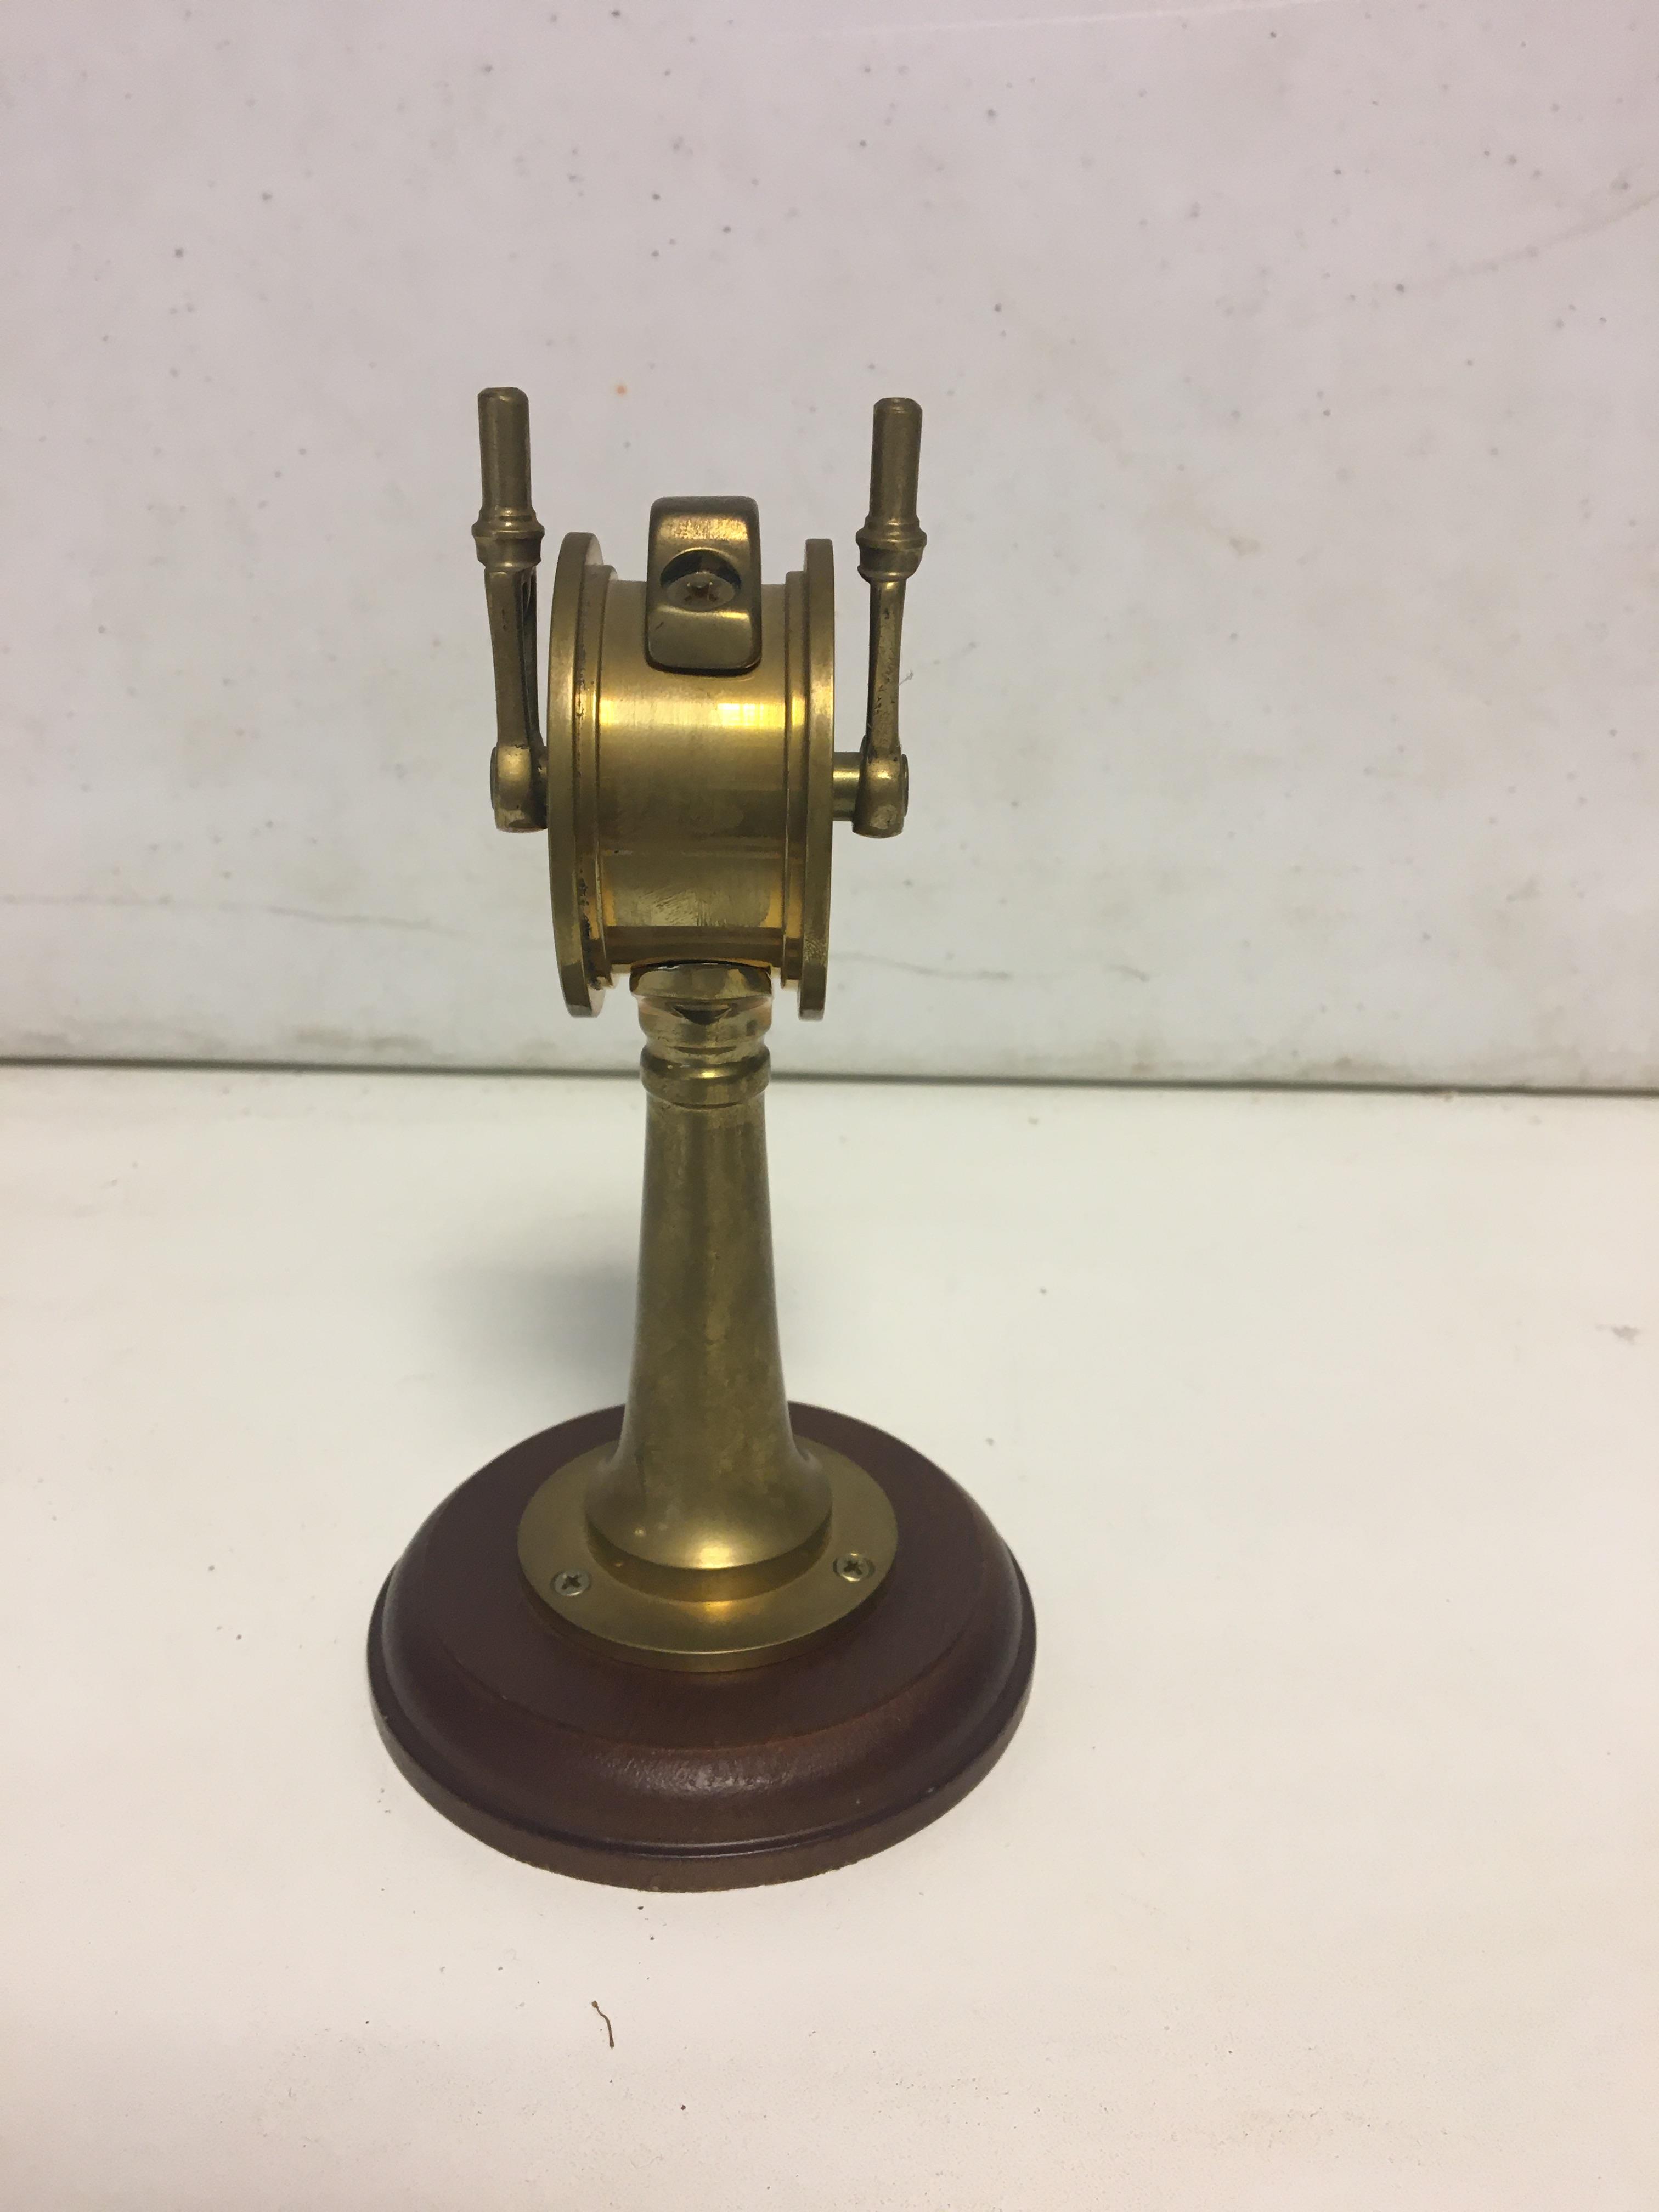 Brass model of a ships control. - Image 3 of 3